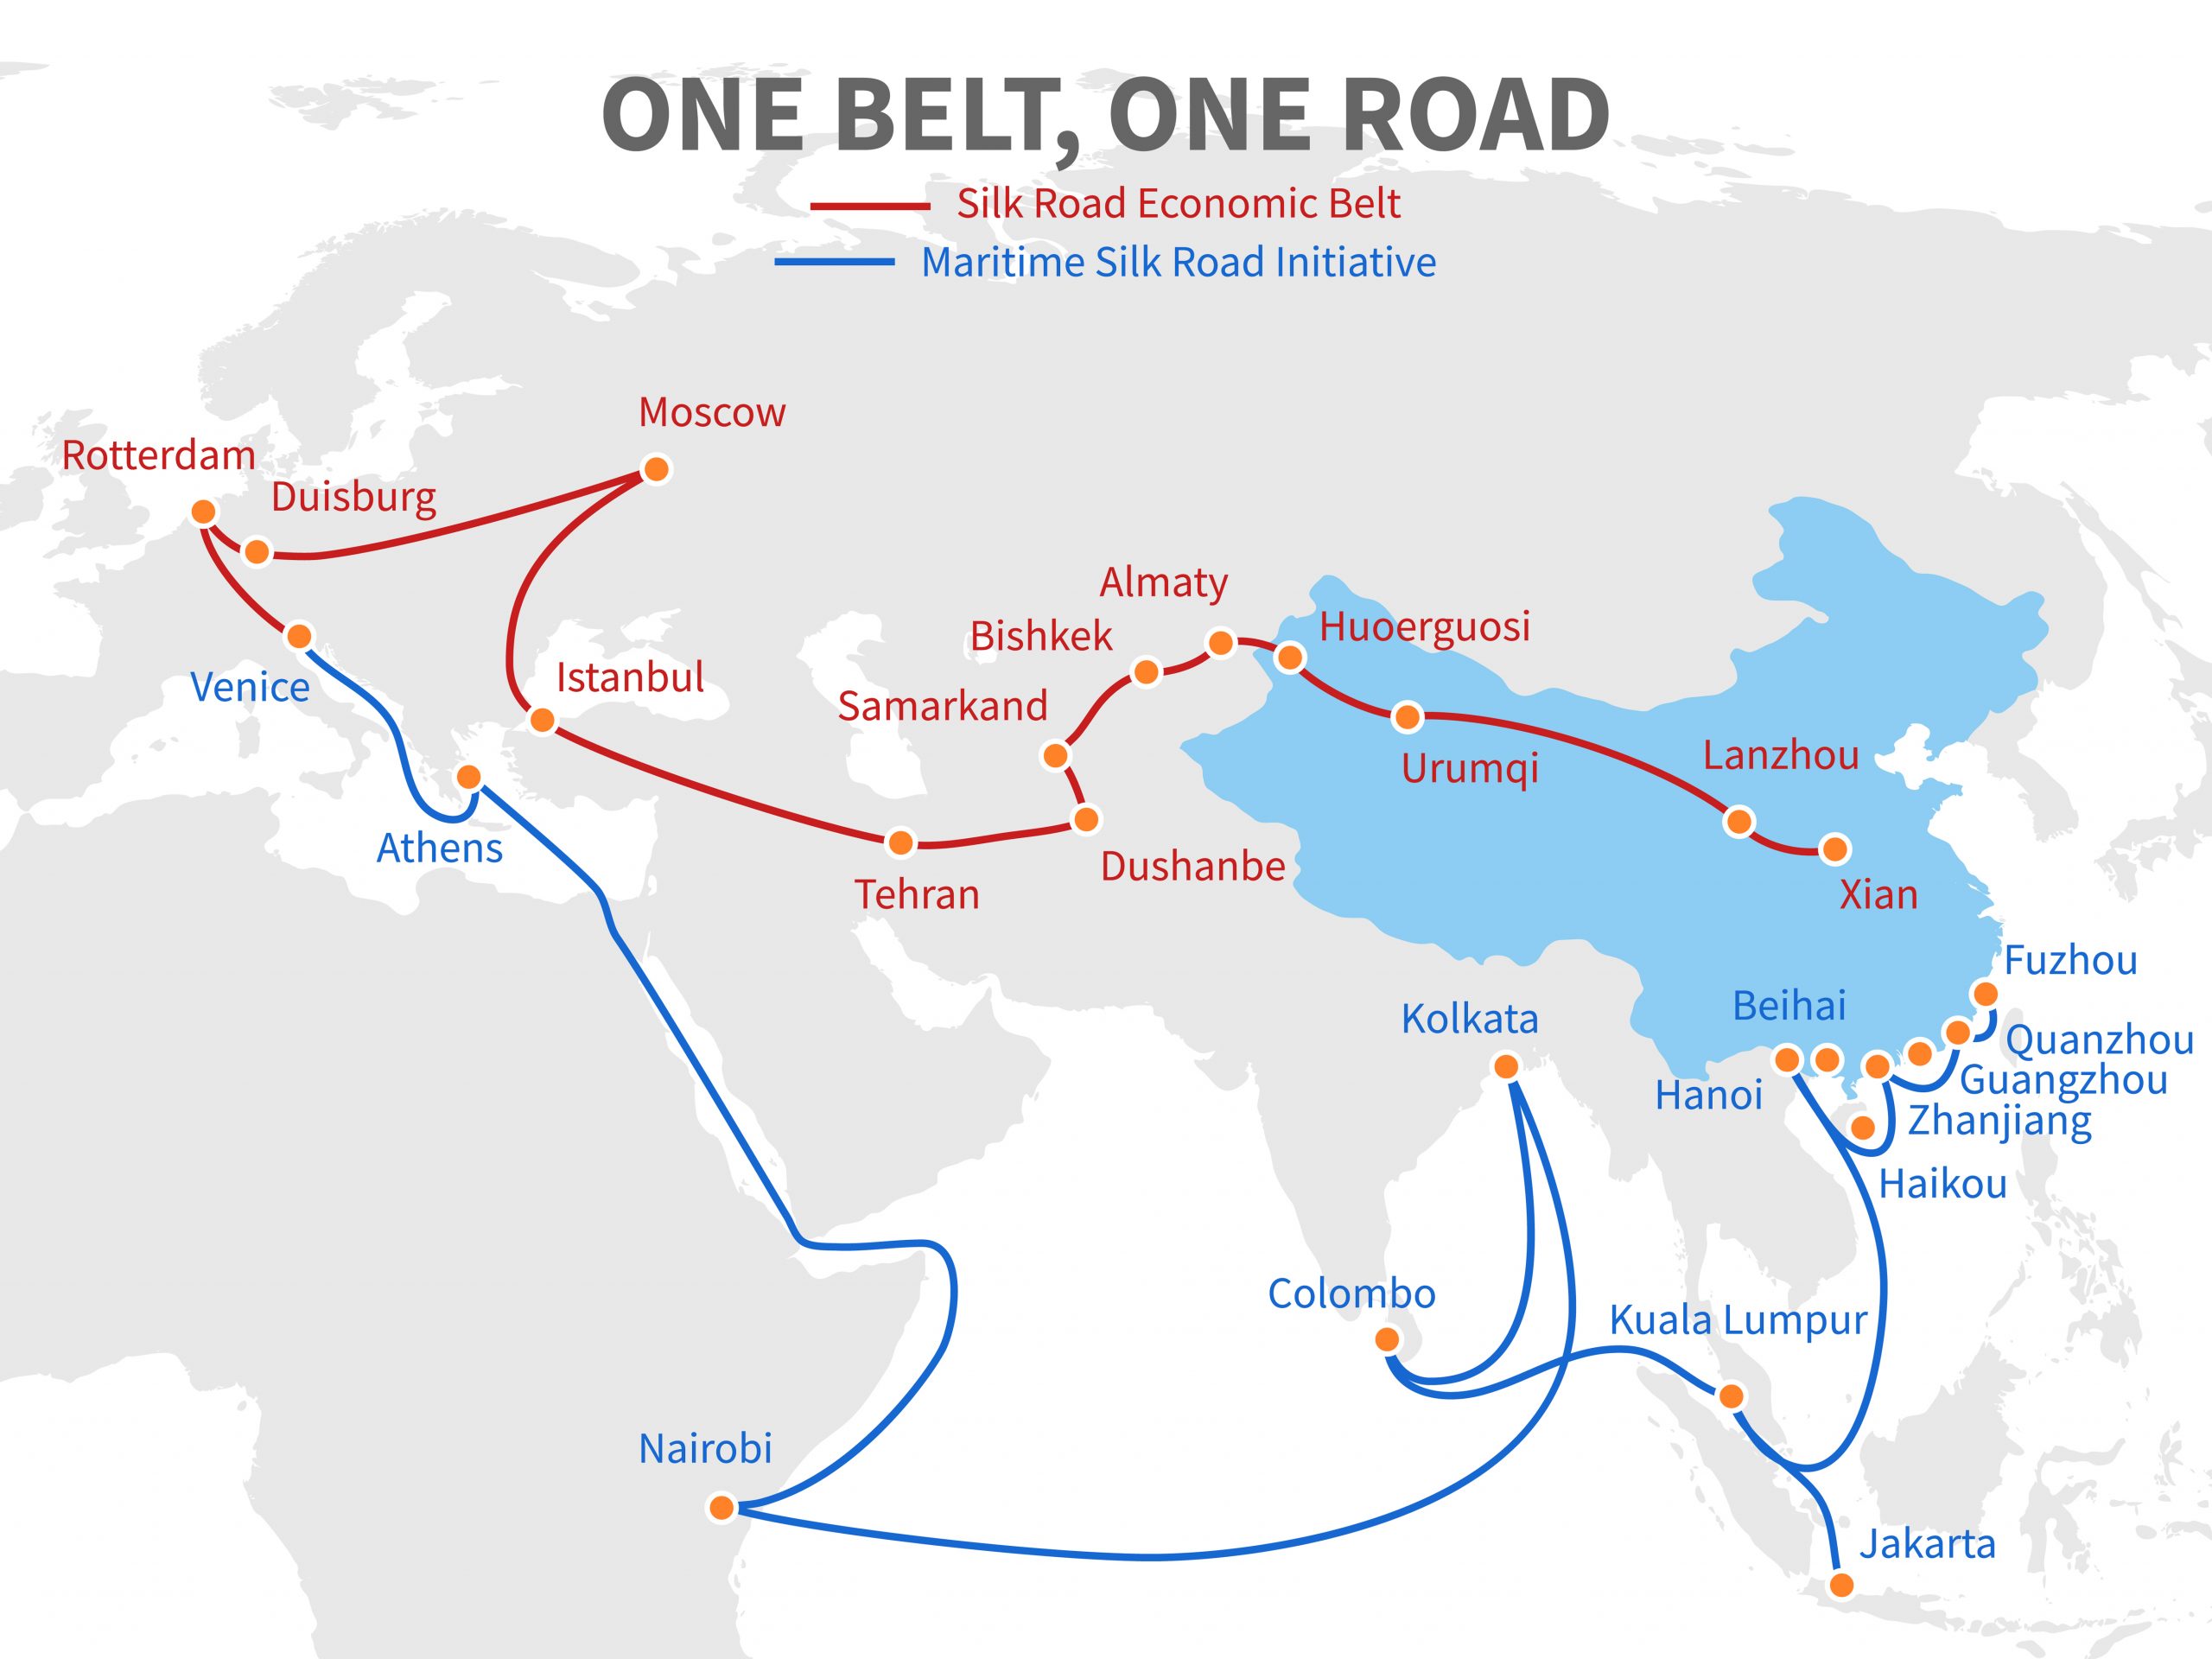 Webinar: Understanding China’s Interaction with Stakeholders in Recipient Countries under the Belt and Road Initiative